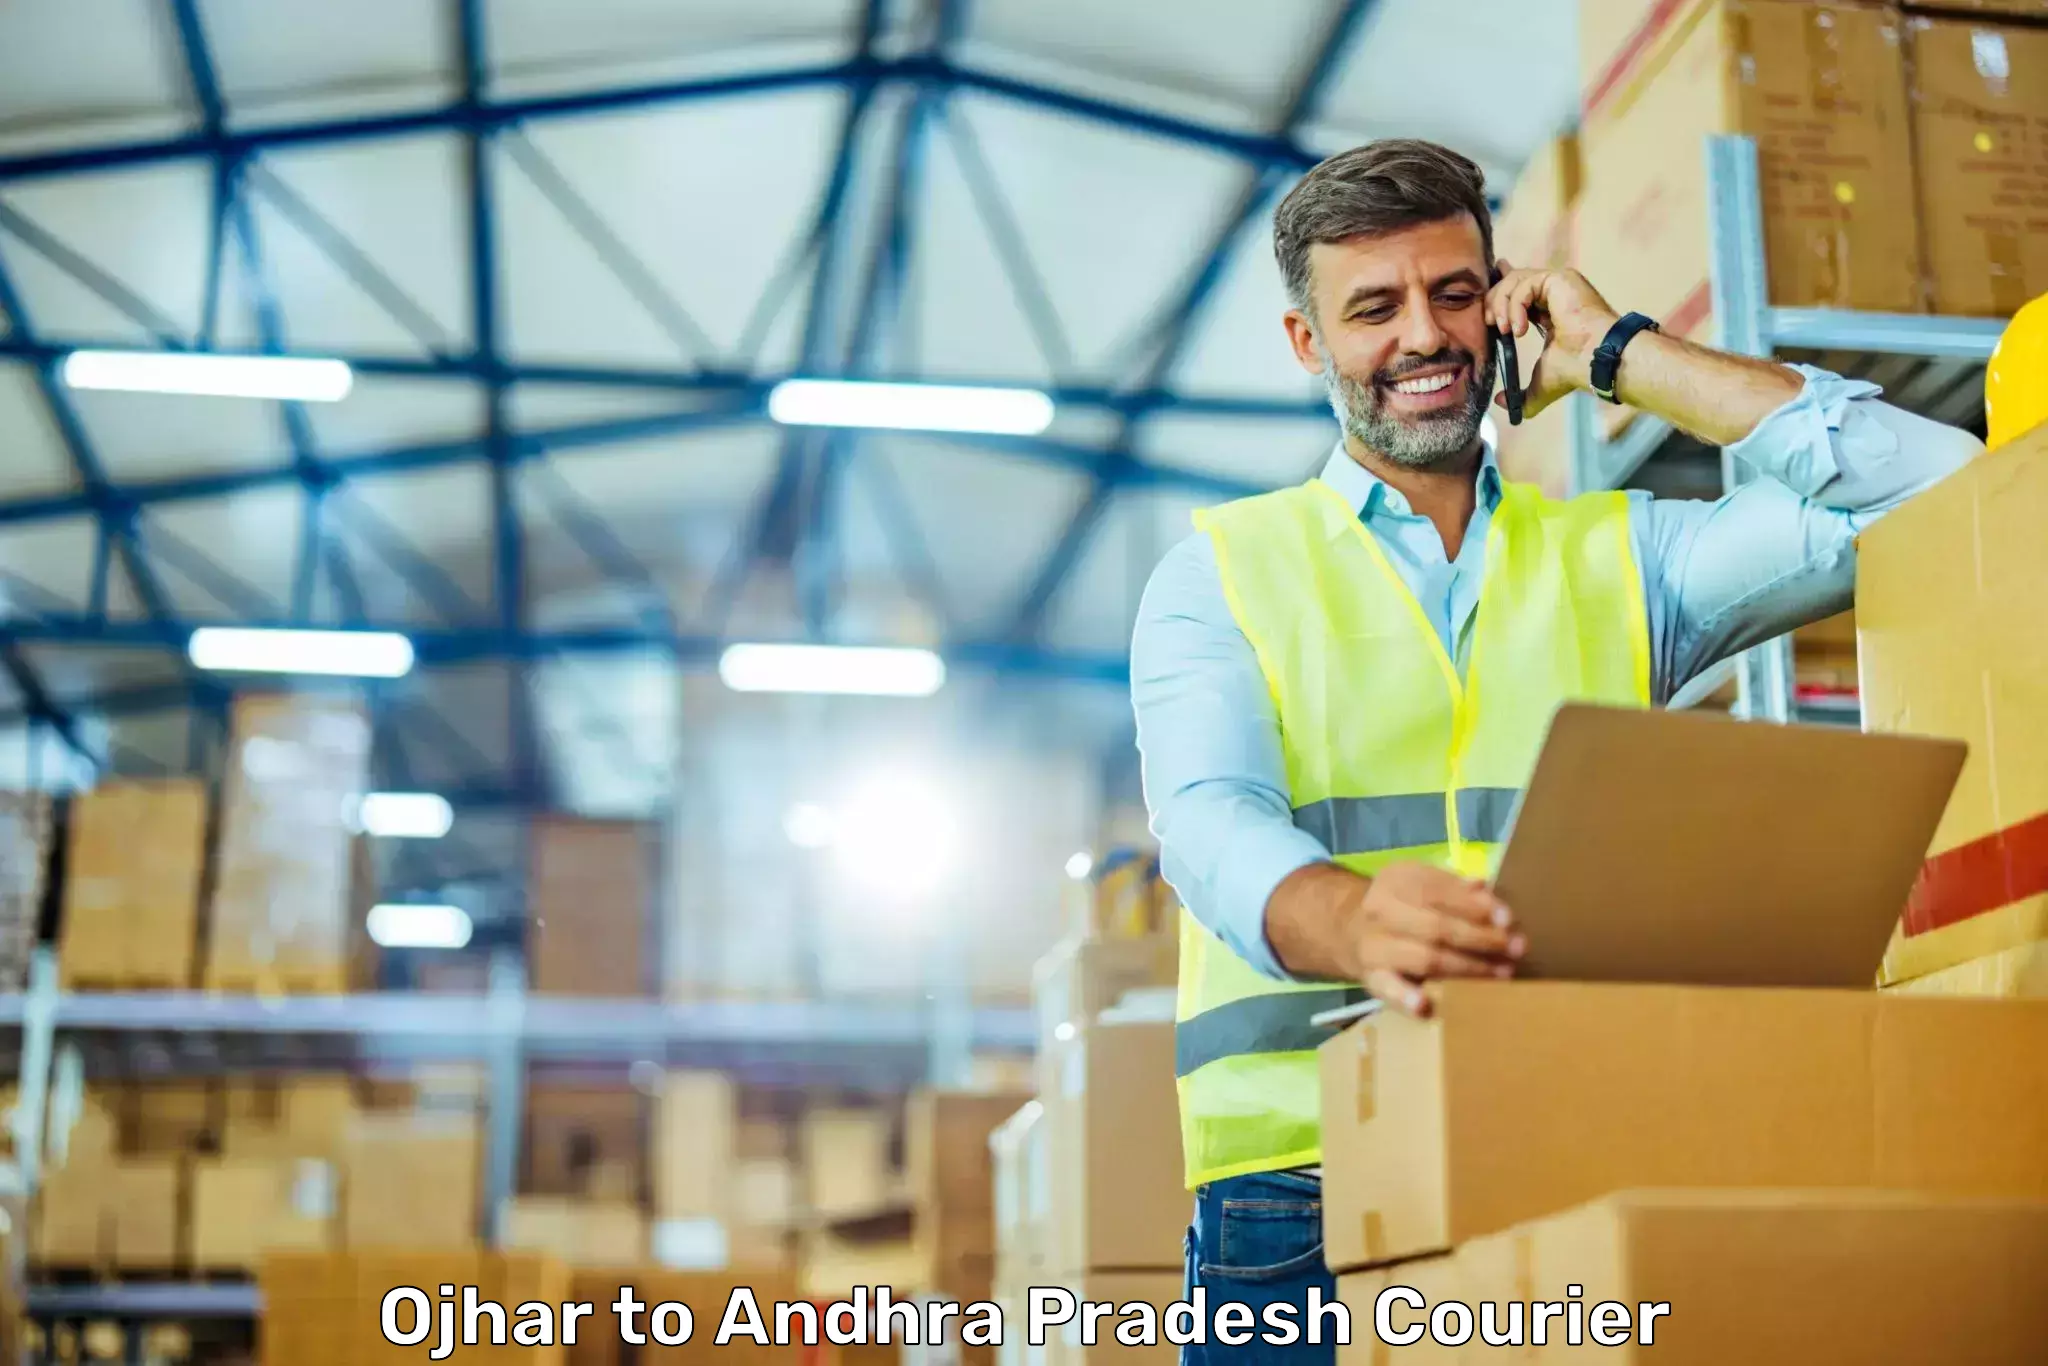 Reliable courier service in Ojhar to Chodavaram